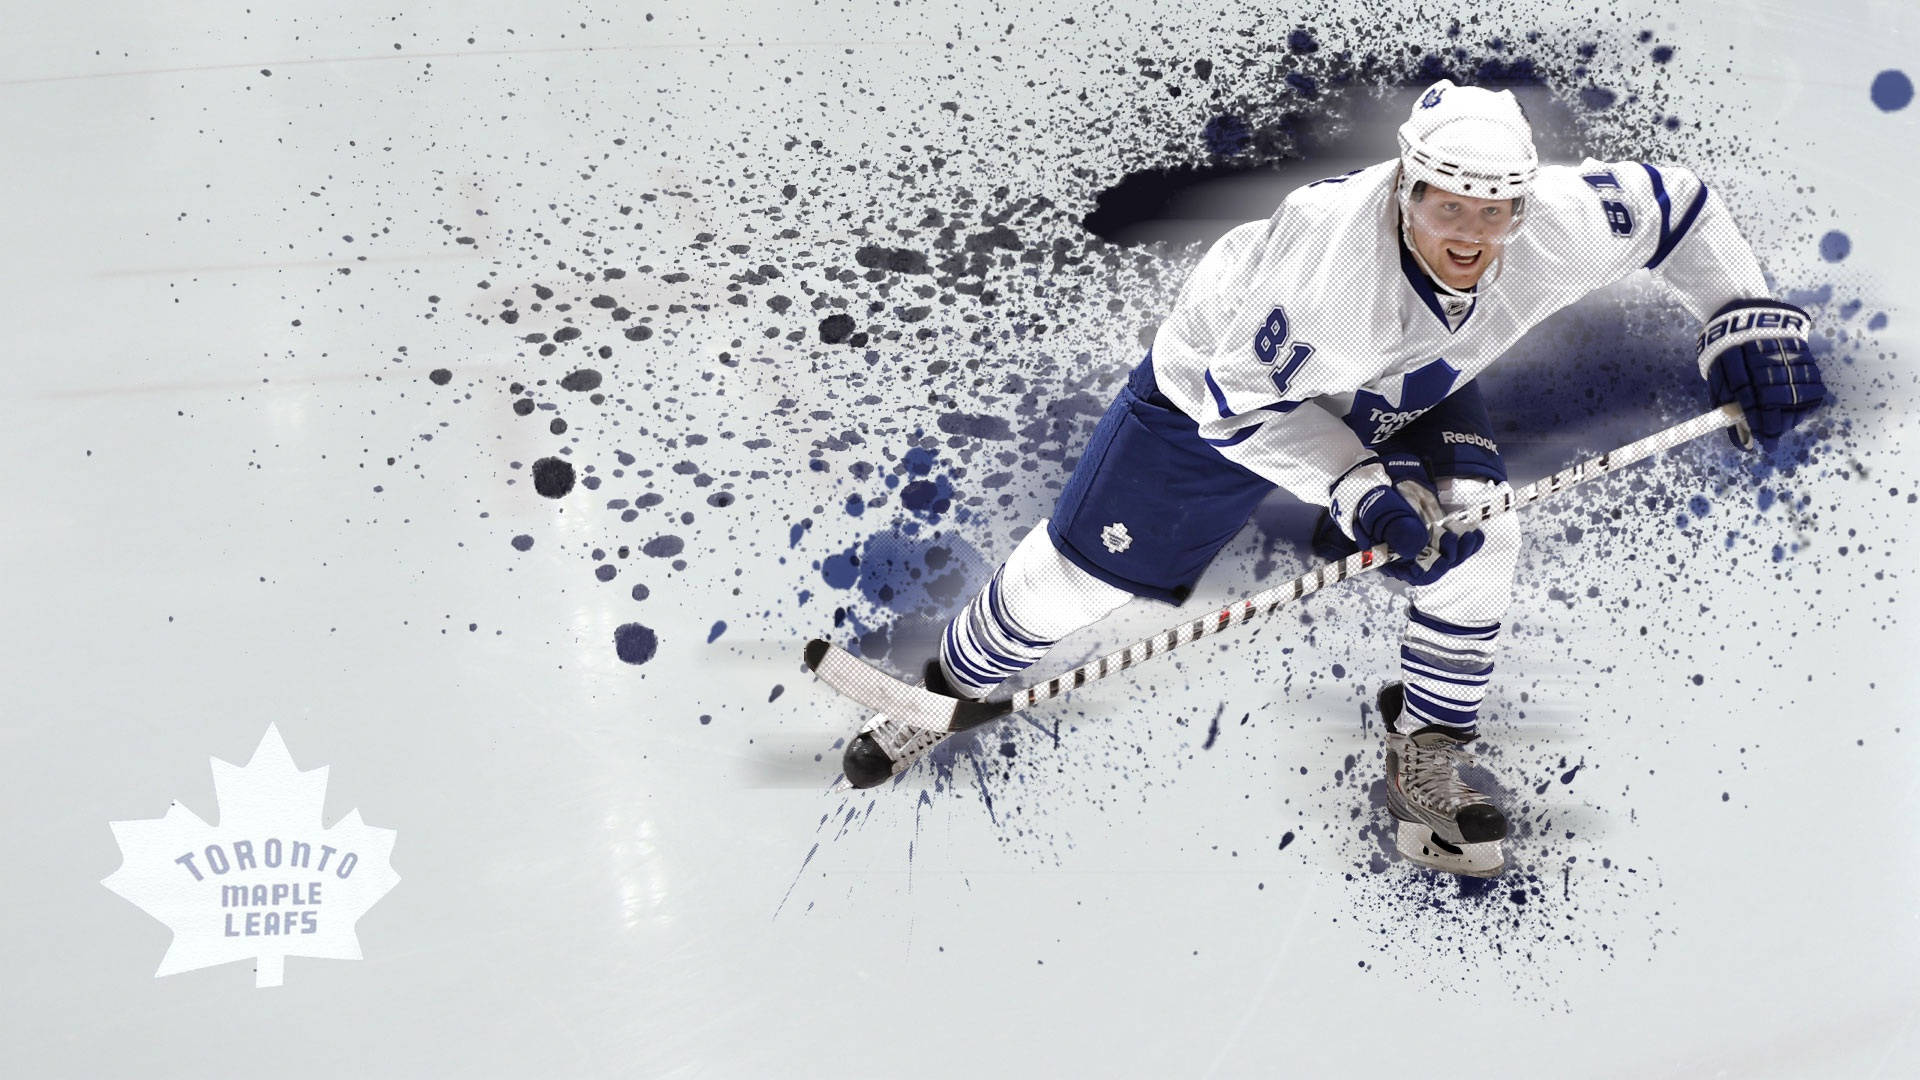 Valiant hockey player, number 81, from Toronto Maple Leafs in action. Wallpaper